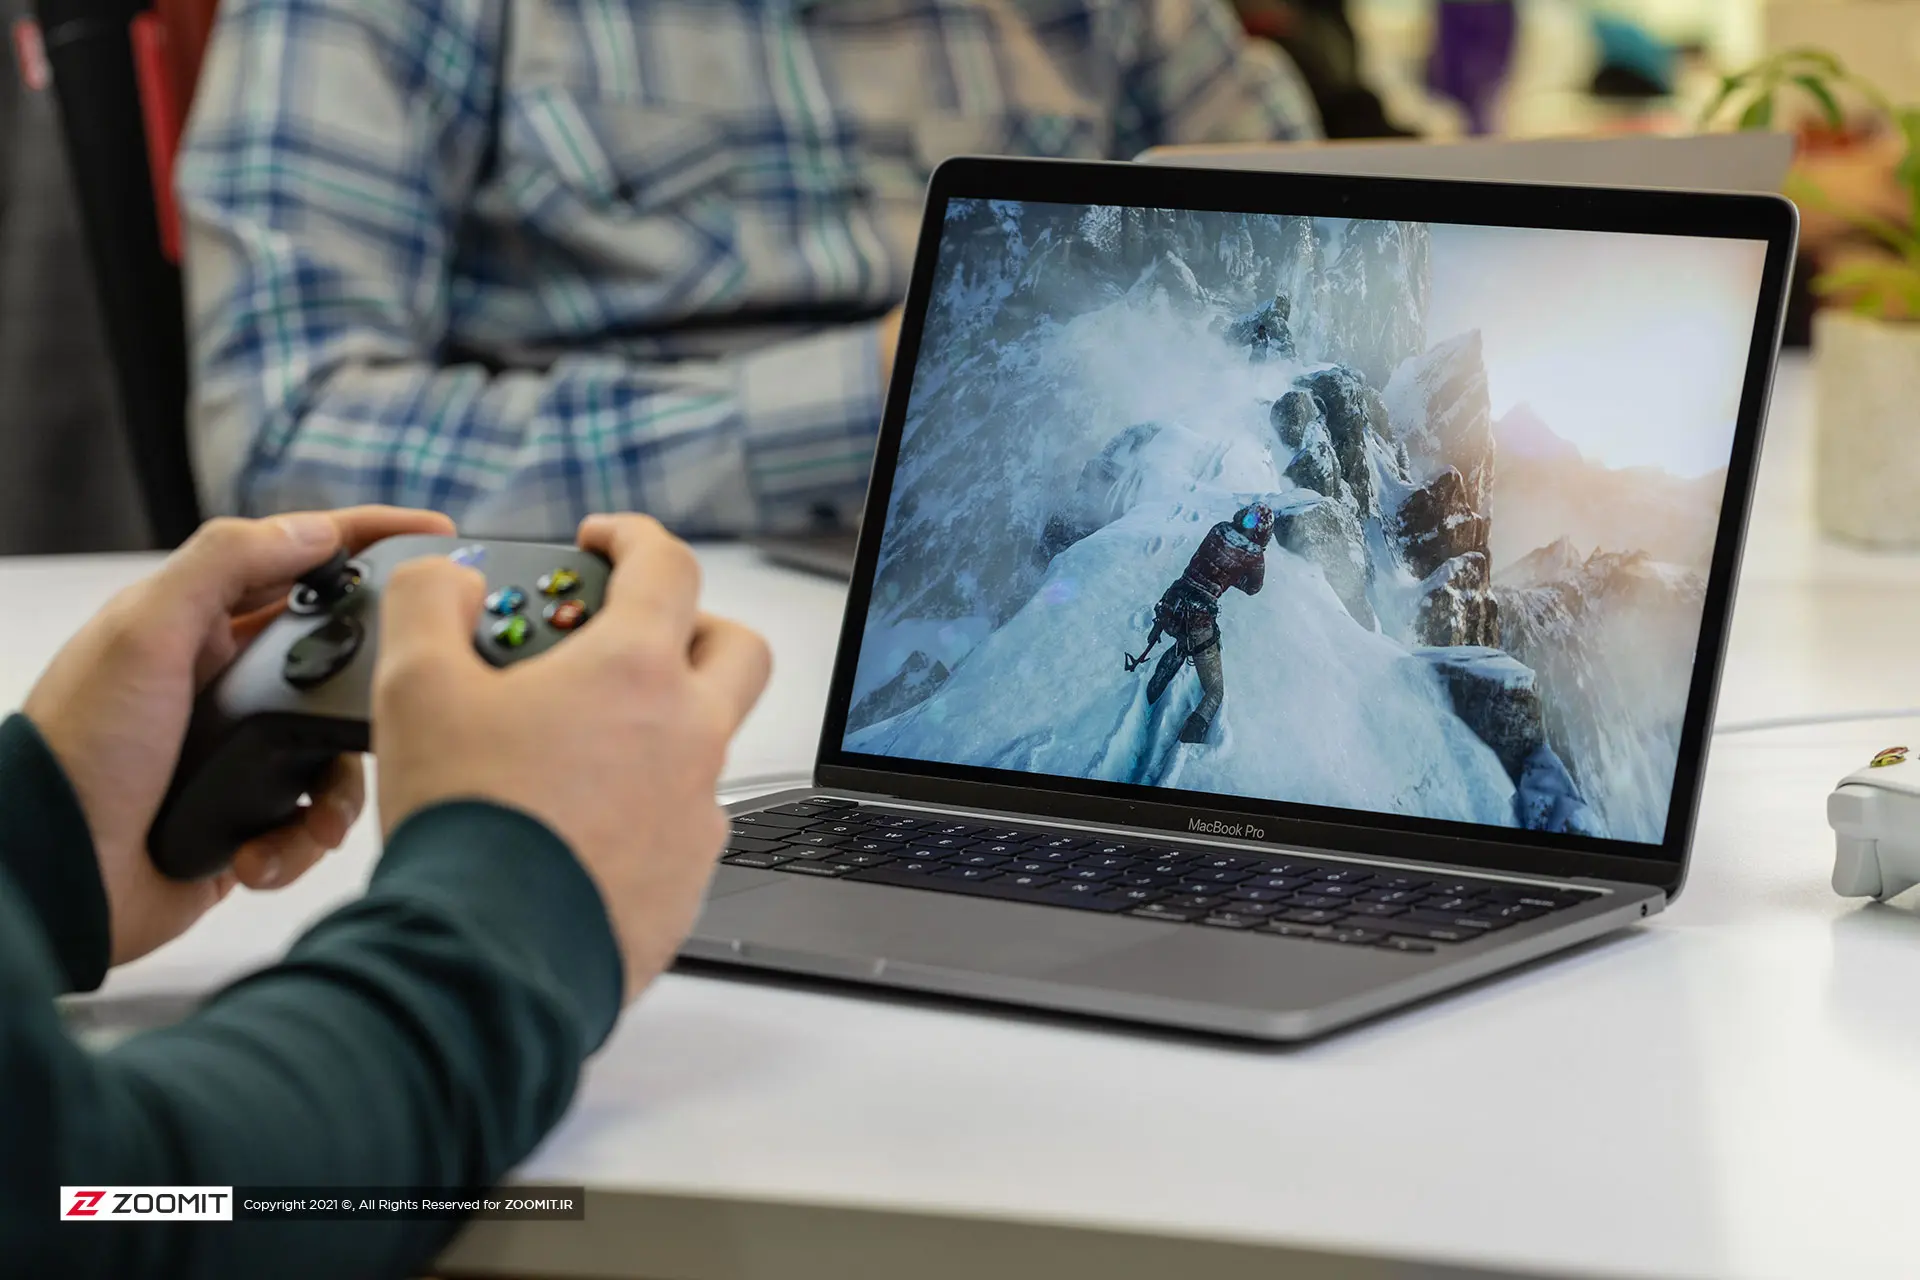 Run Windows Games Easily On Mac With This New Apple Tool!